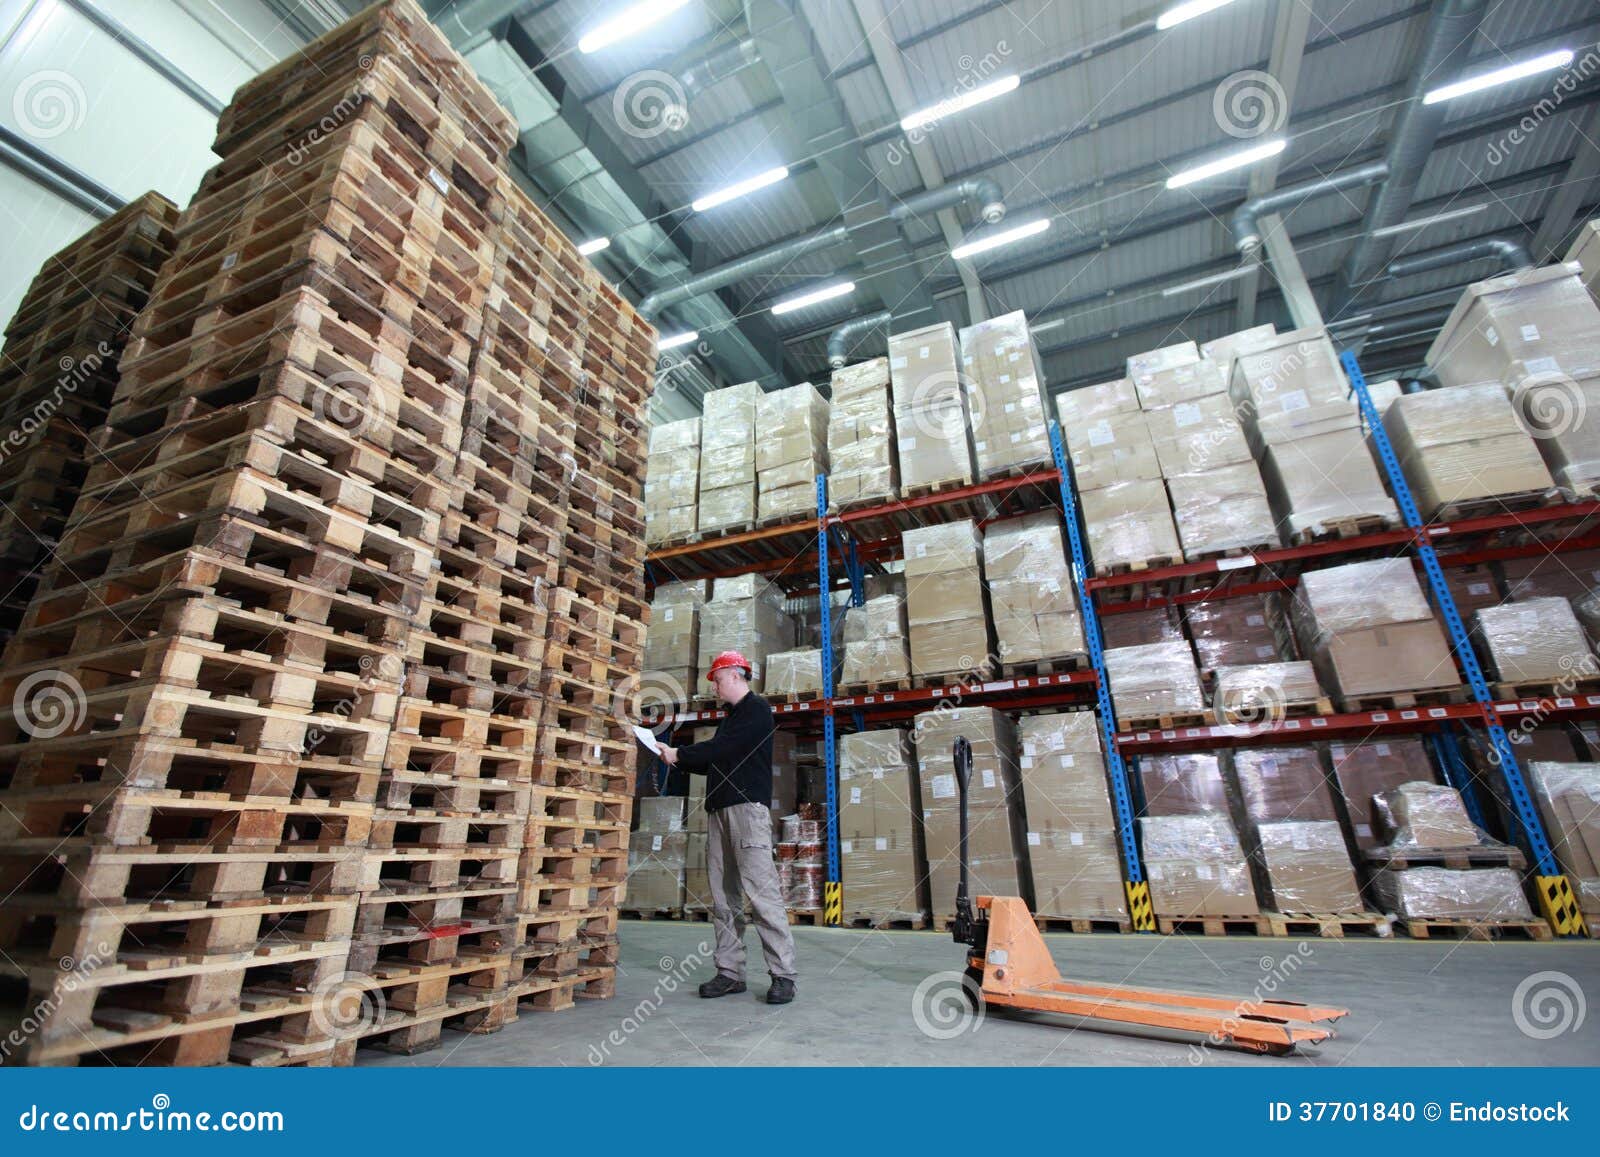 worker with hand pallet truck at large stack of wooden pallets in storehouse